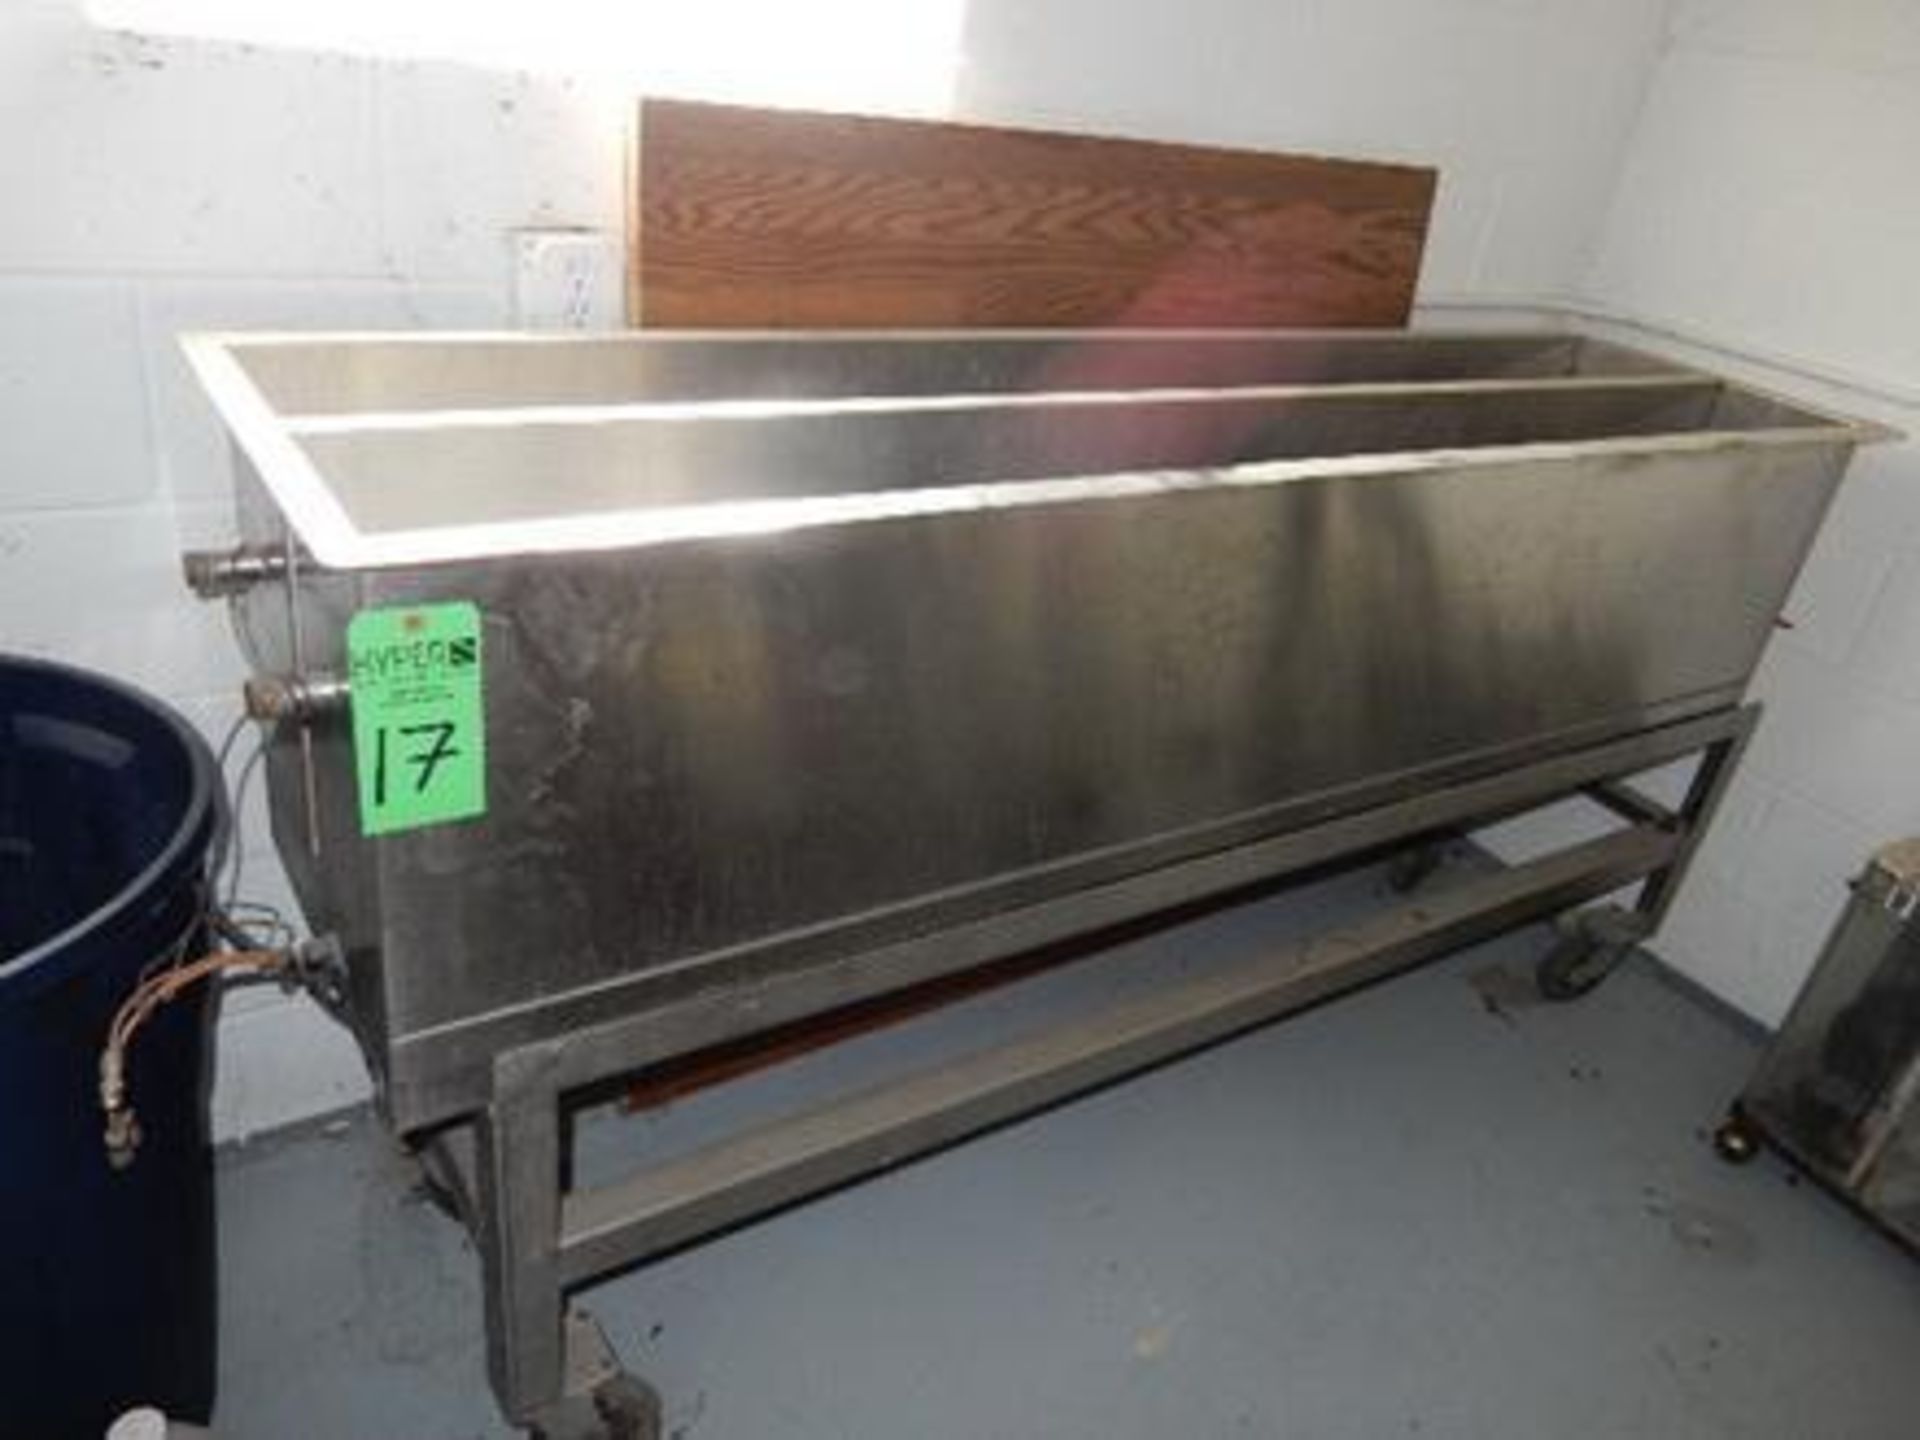 Stainless Steel Cleaner Soak Tank Dimension: 21 1/2 x 78" x 40". - Image 3 of 3